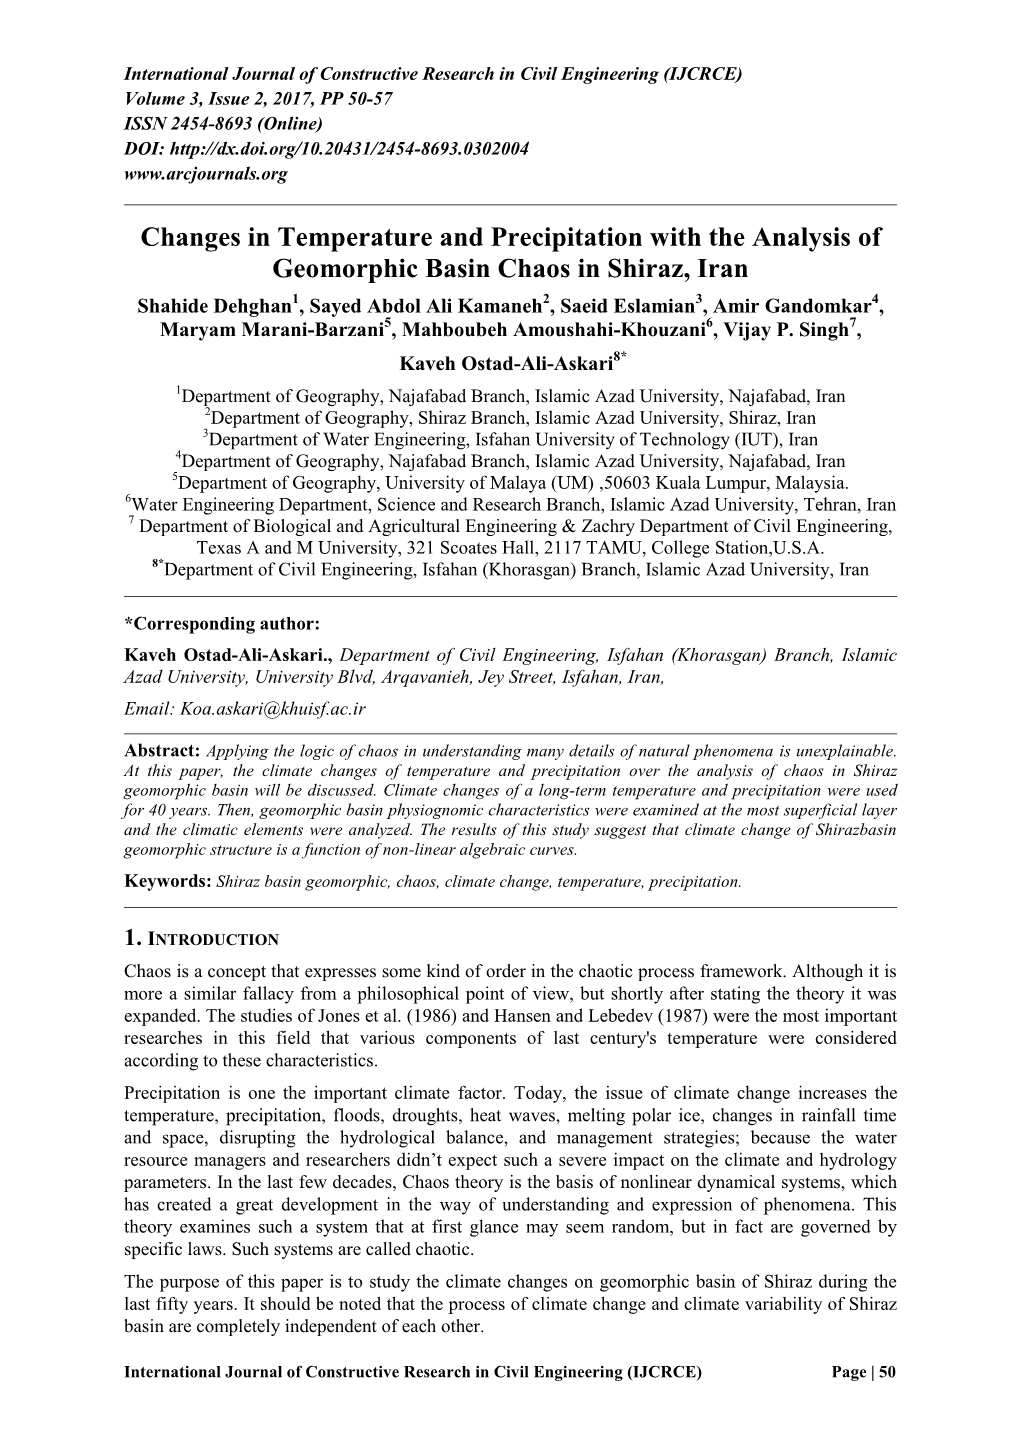 Changes in Temperature and Precipitation with the Analysis Of